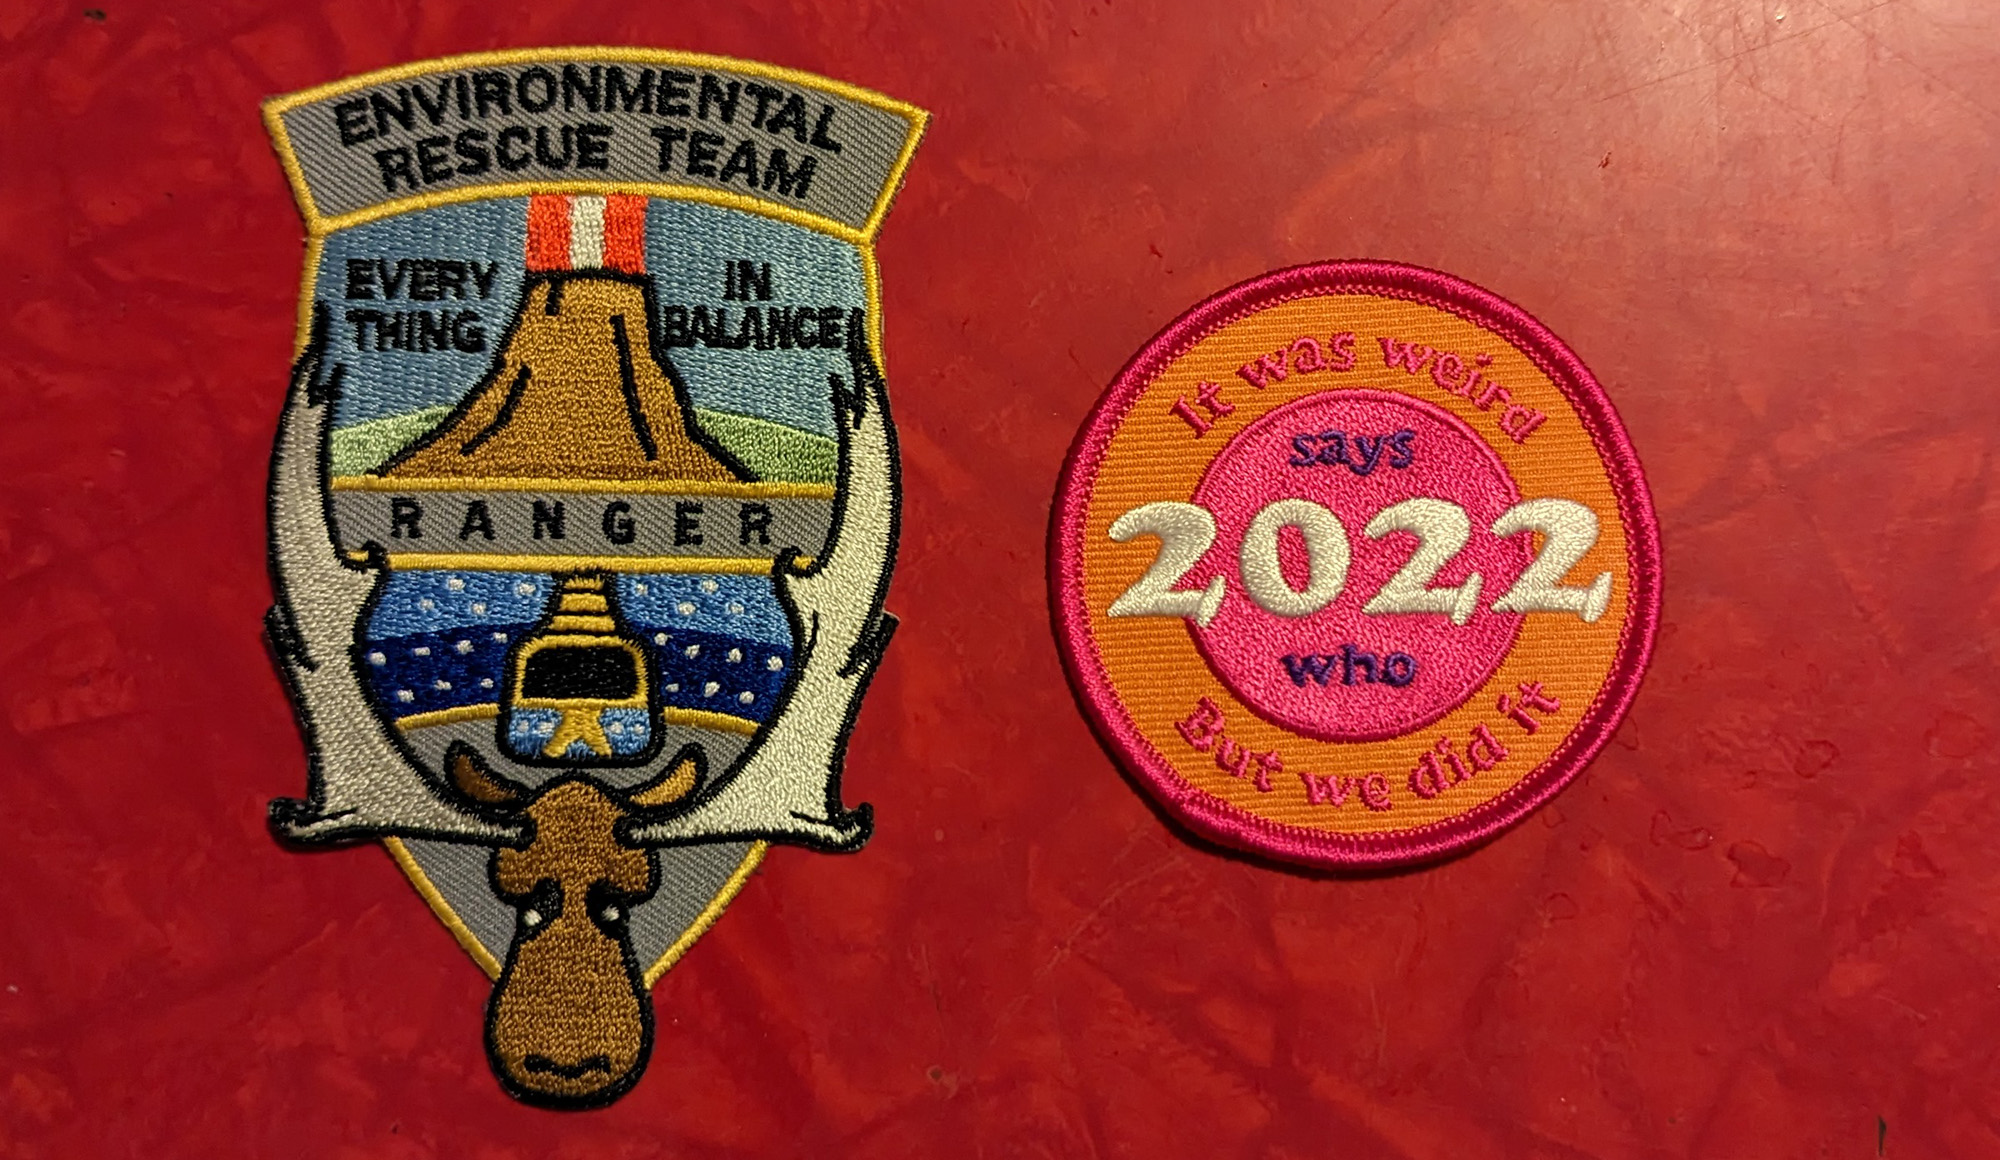 two patches I designed, one is a patch for the Environmental Rescue Team from the book The Terraformers, and the other is a 2022 survival badge for Says Who Podcast that reads It was weird, but we did it.